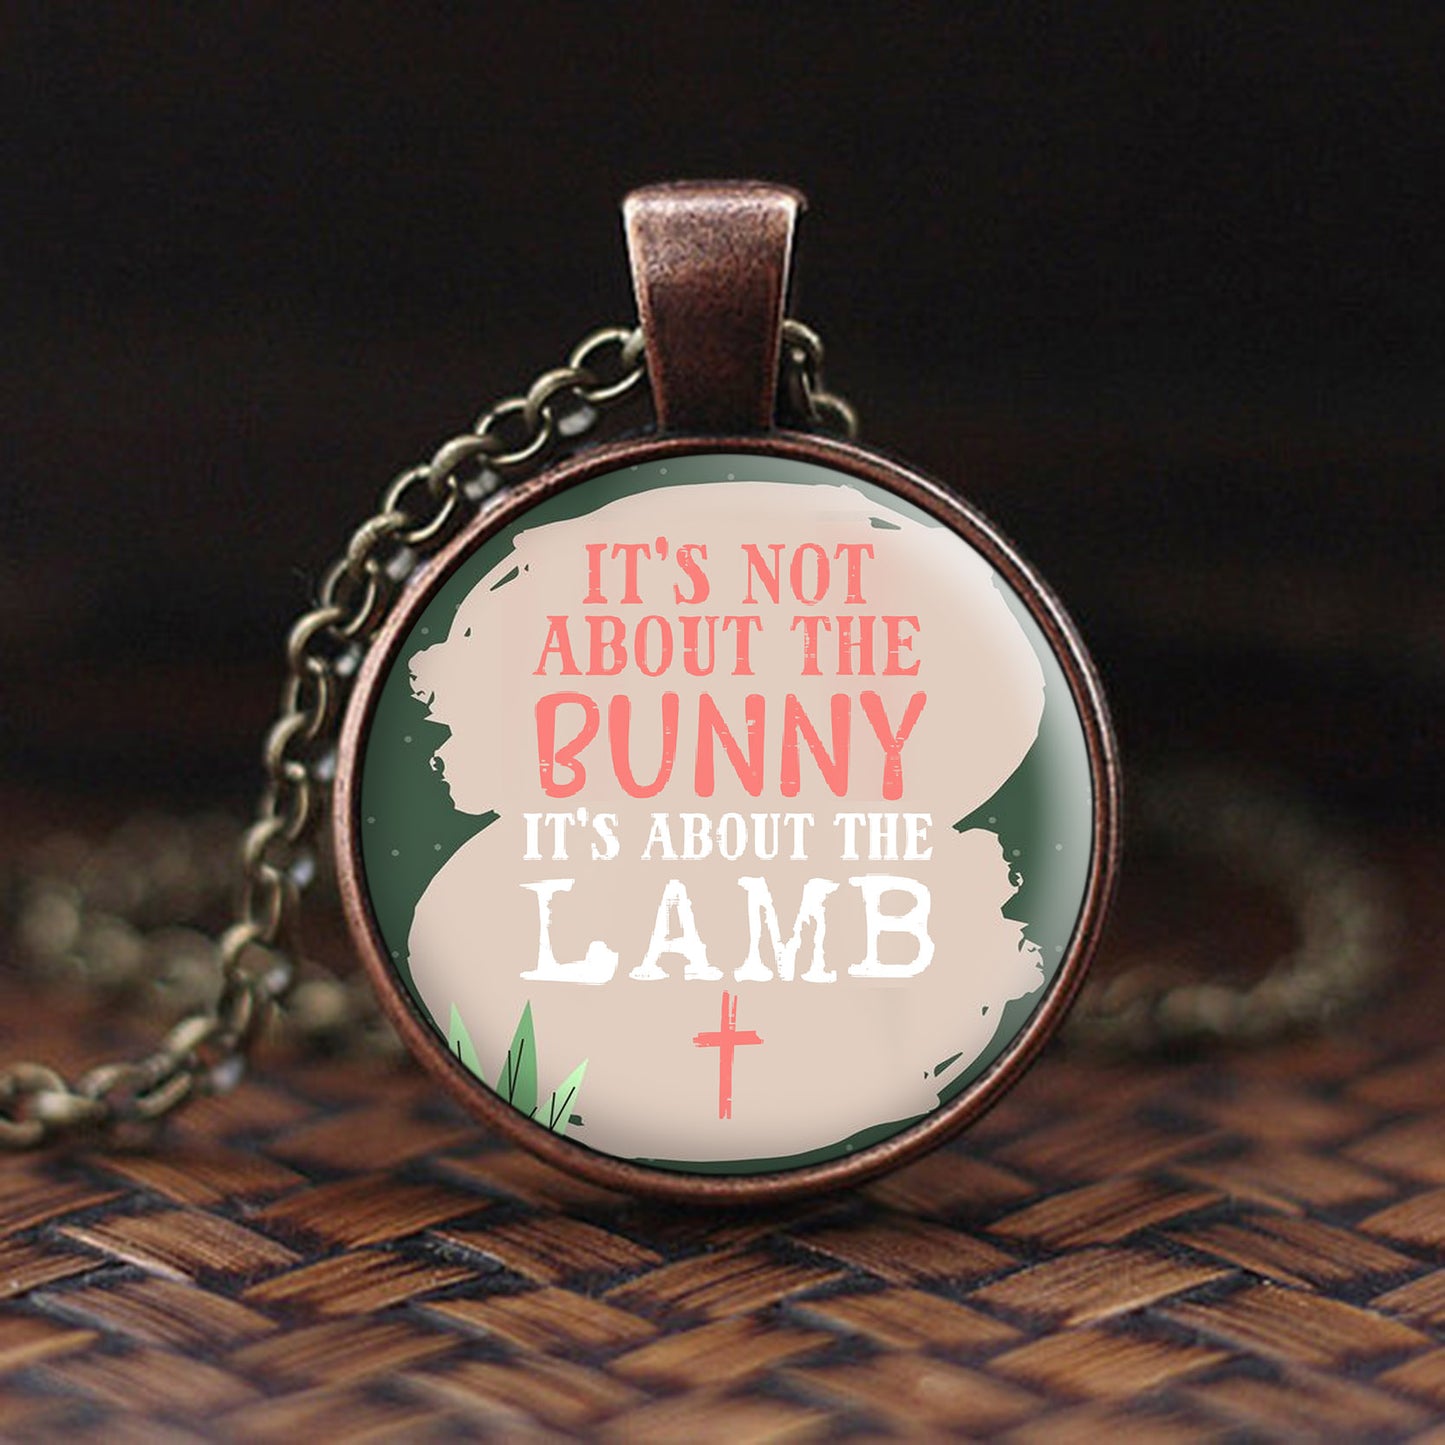 It's Not About The Bunny About Lamb - Religious Pendant - Jesus Necklace - Religious Necklace - Ciaocustom